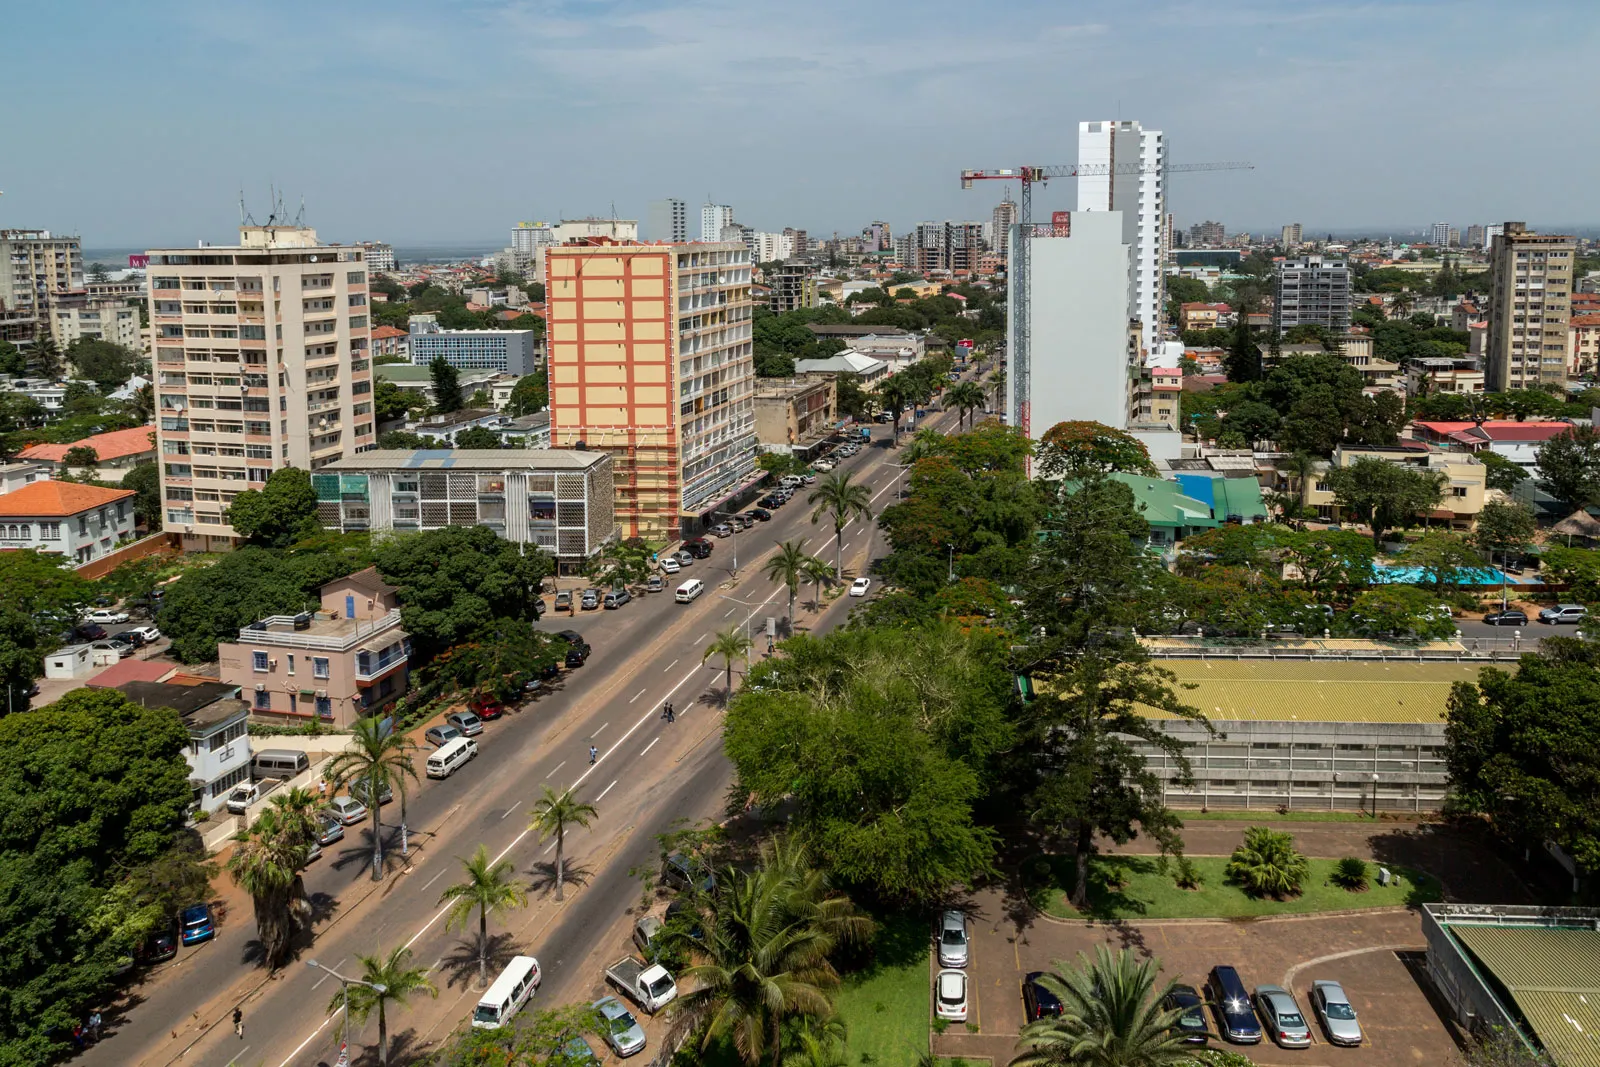 The Board of Directors of the African Development Fund has approved a grant of US$6.73 million to Mozambique to support the implementation of the Institutional Support Project for Business Environment and Governance. The aim of the project is to increase resilience through institutional capacity building to support private-sector development and the management of public finances.